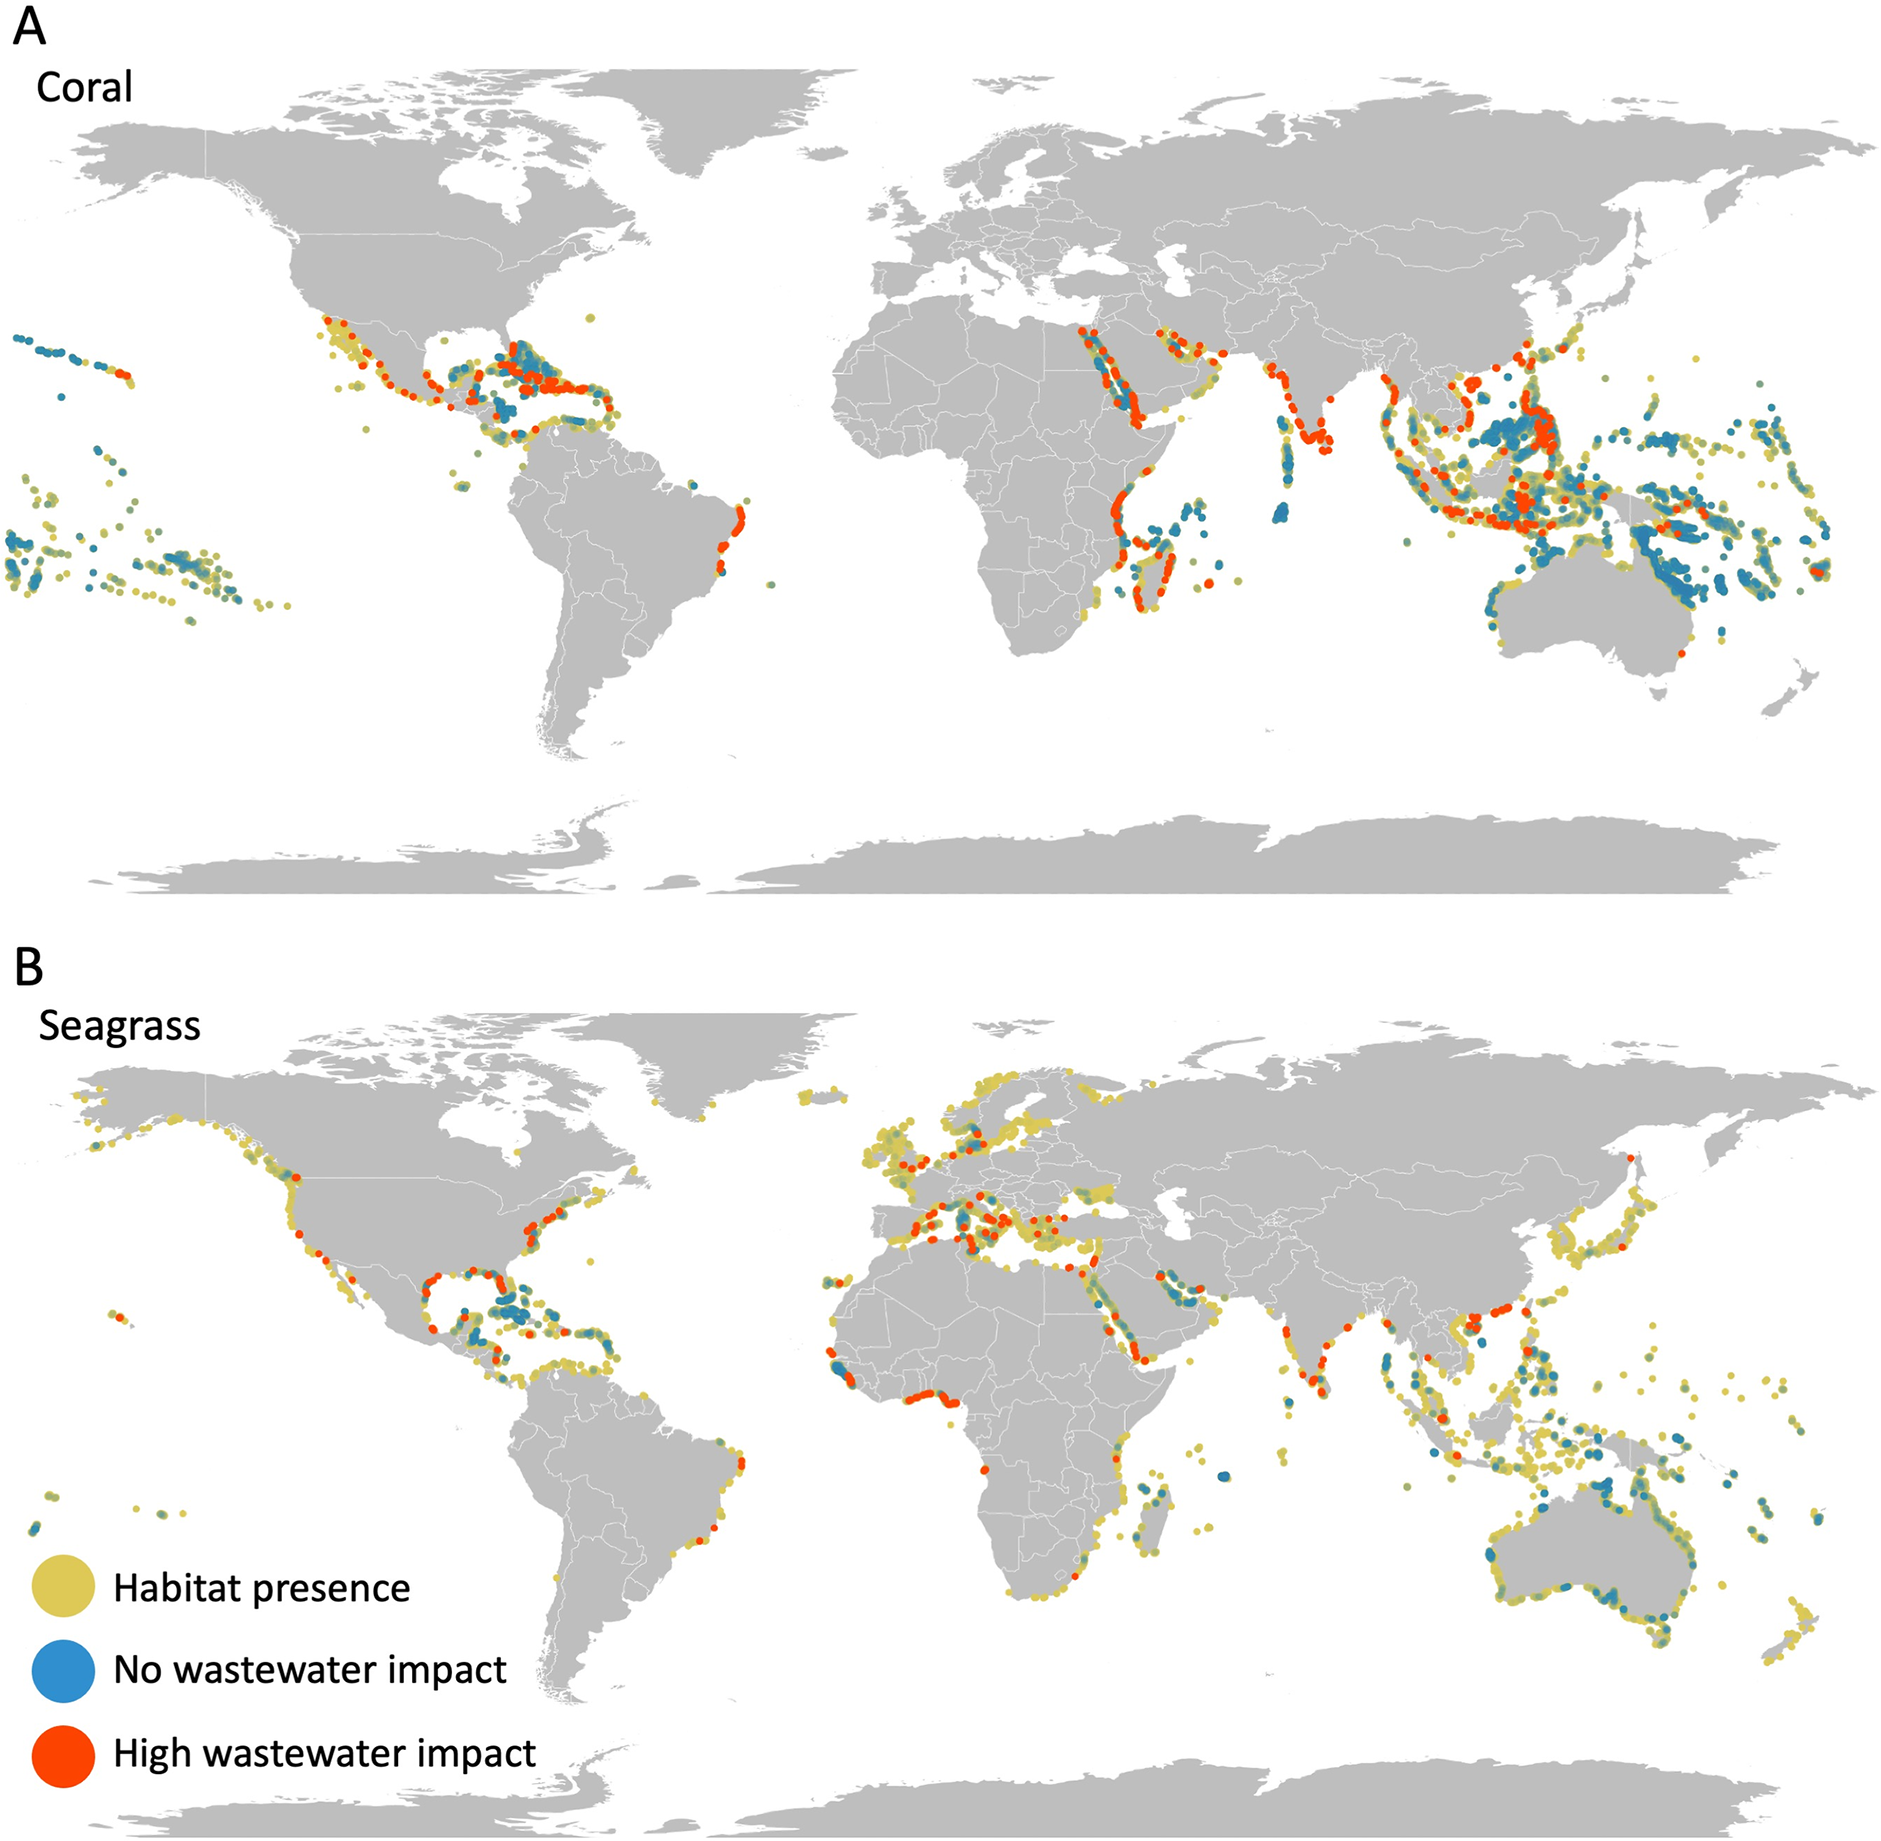 Expected impact of N on sensitive coastal habitats. Maps show where (A) coral reefs and (B) seagrass beds are heavily impacted (raster cells in top 2.5% of exposure; red dots), not impacted (no exposure to wastewater N; dark blue dots), or impacted but not in the top 2.5% (yellow dots). Raster cells are represented as points that visually over-represents the habitat; red is overlaid on top which makes it visually dominant; blue points are transparent and overlaid on green/yellow points such that higher densities of unimpacted areas are brighter blue.